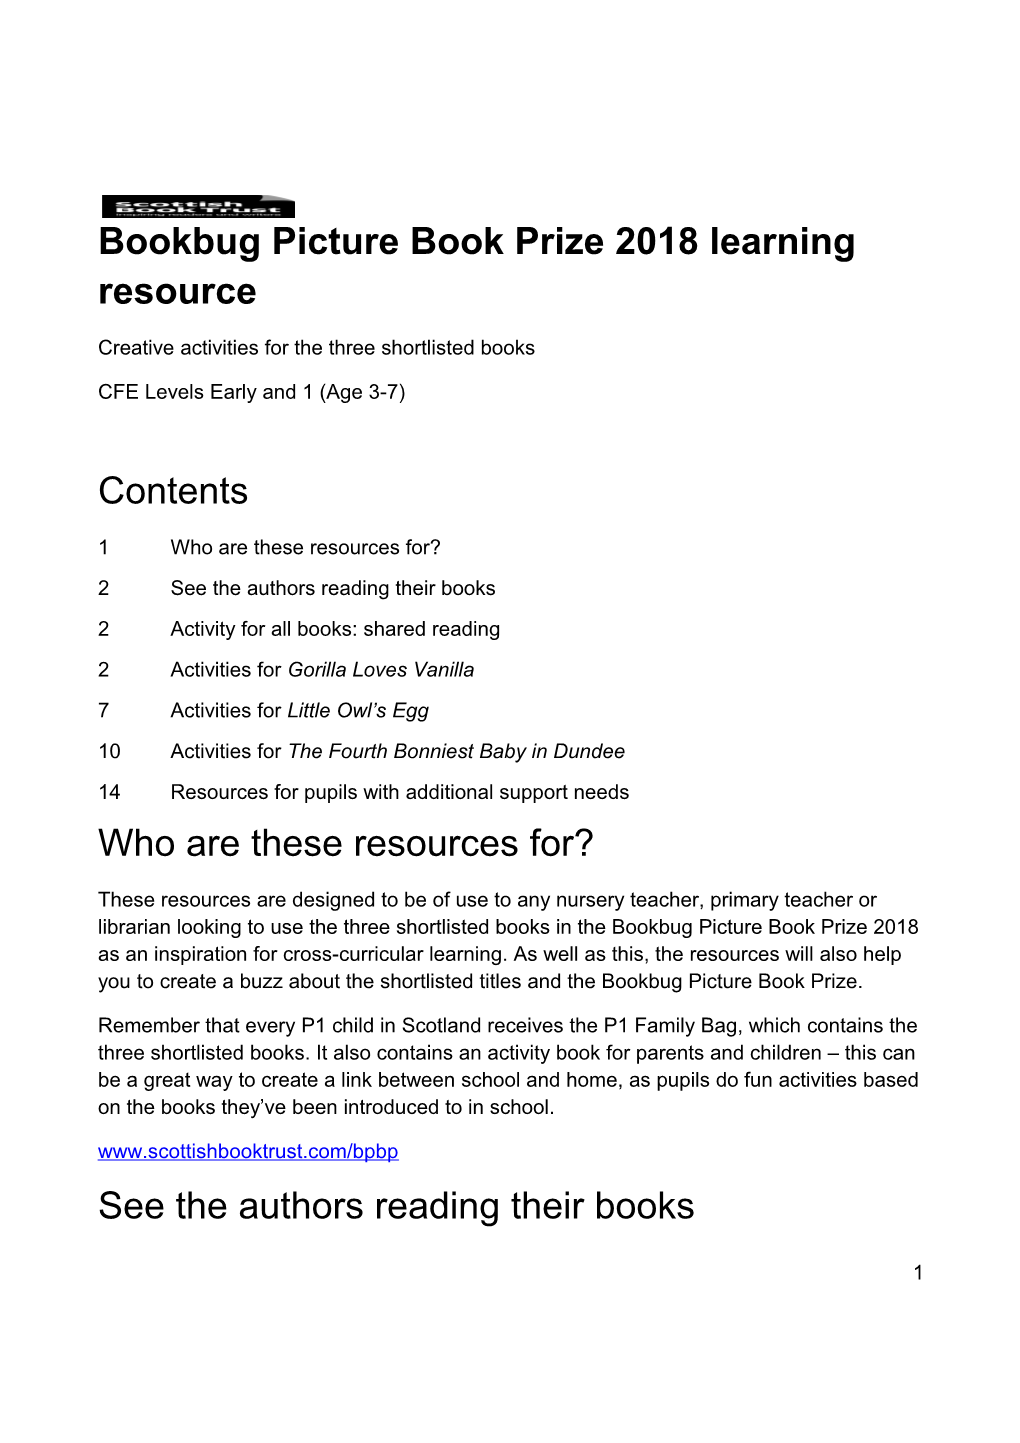 Bookbug Picture Book Prize 2018 Learning Resource